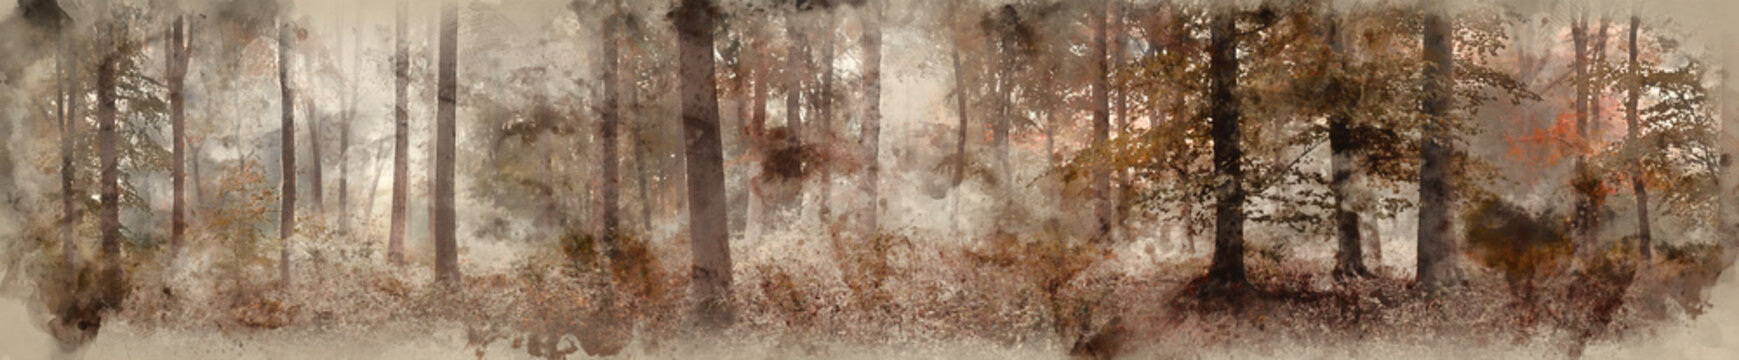 Digital watercolor painting of Large colorful panorama foggy Autumn Fall forest landscape